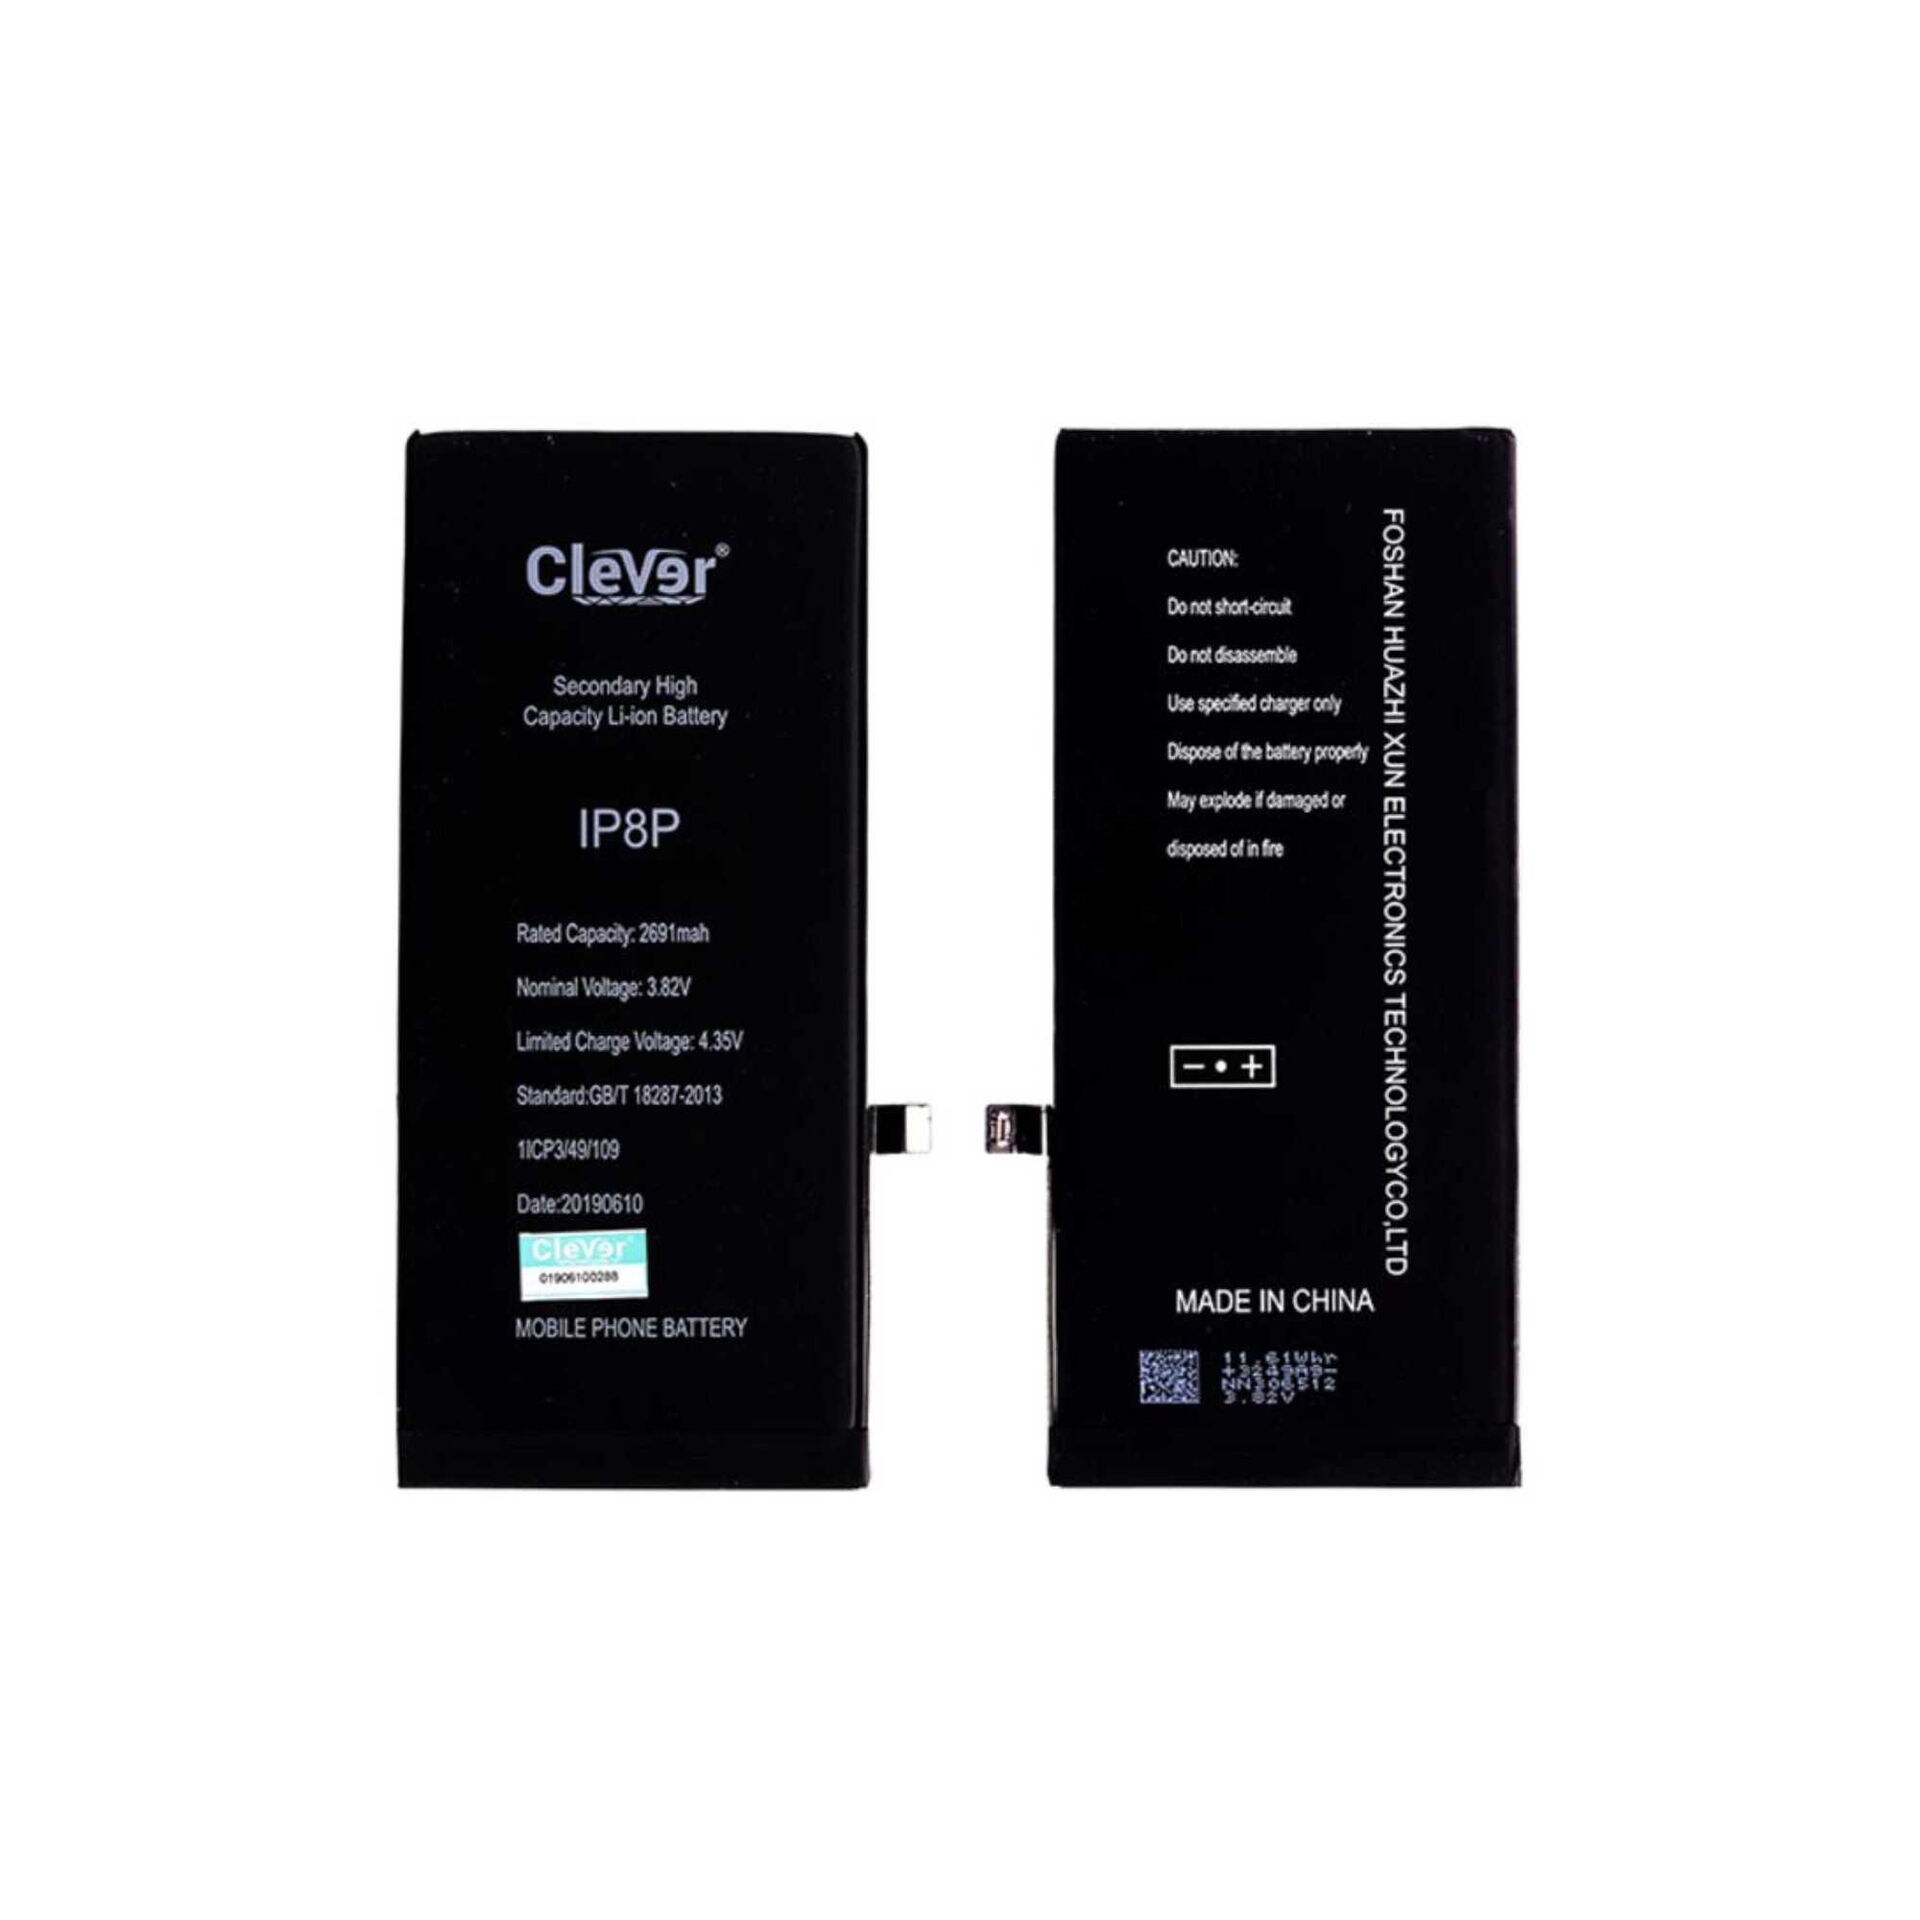 Clever 2915 Mah Replacement Battery for Apple Iphone 8+, Black